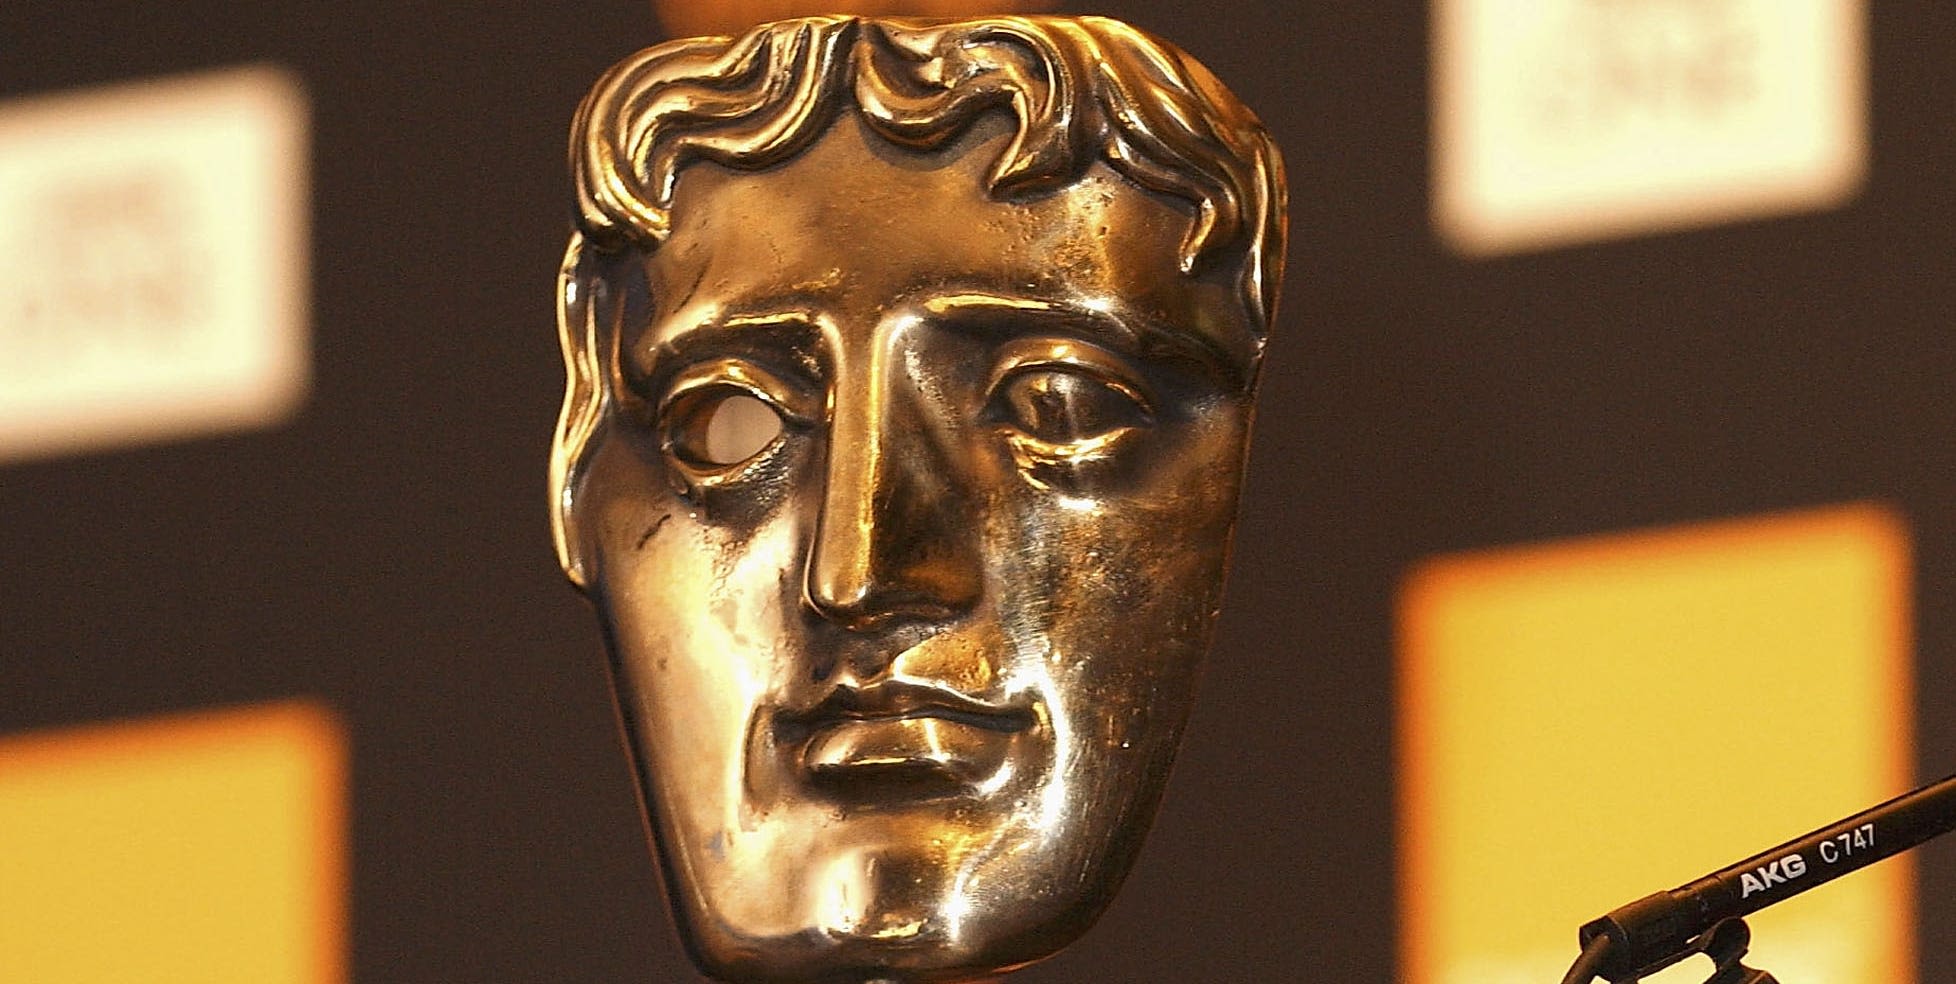 BAFTA introduces first new award in five years as part of major changes